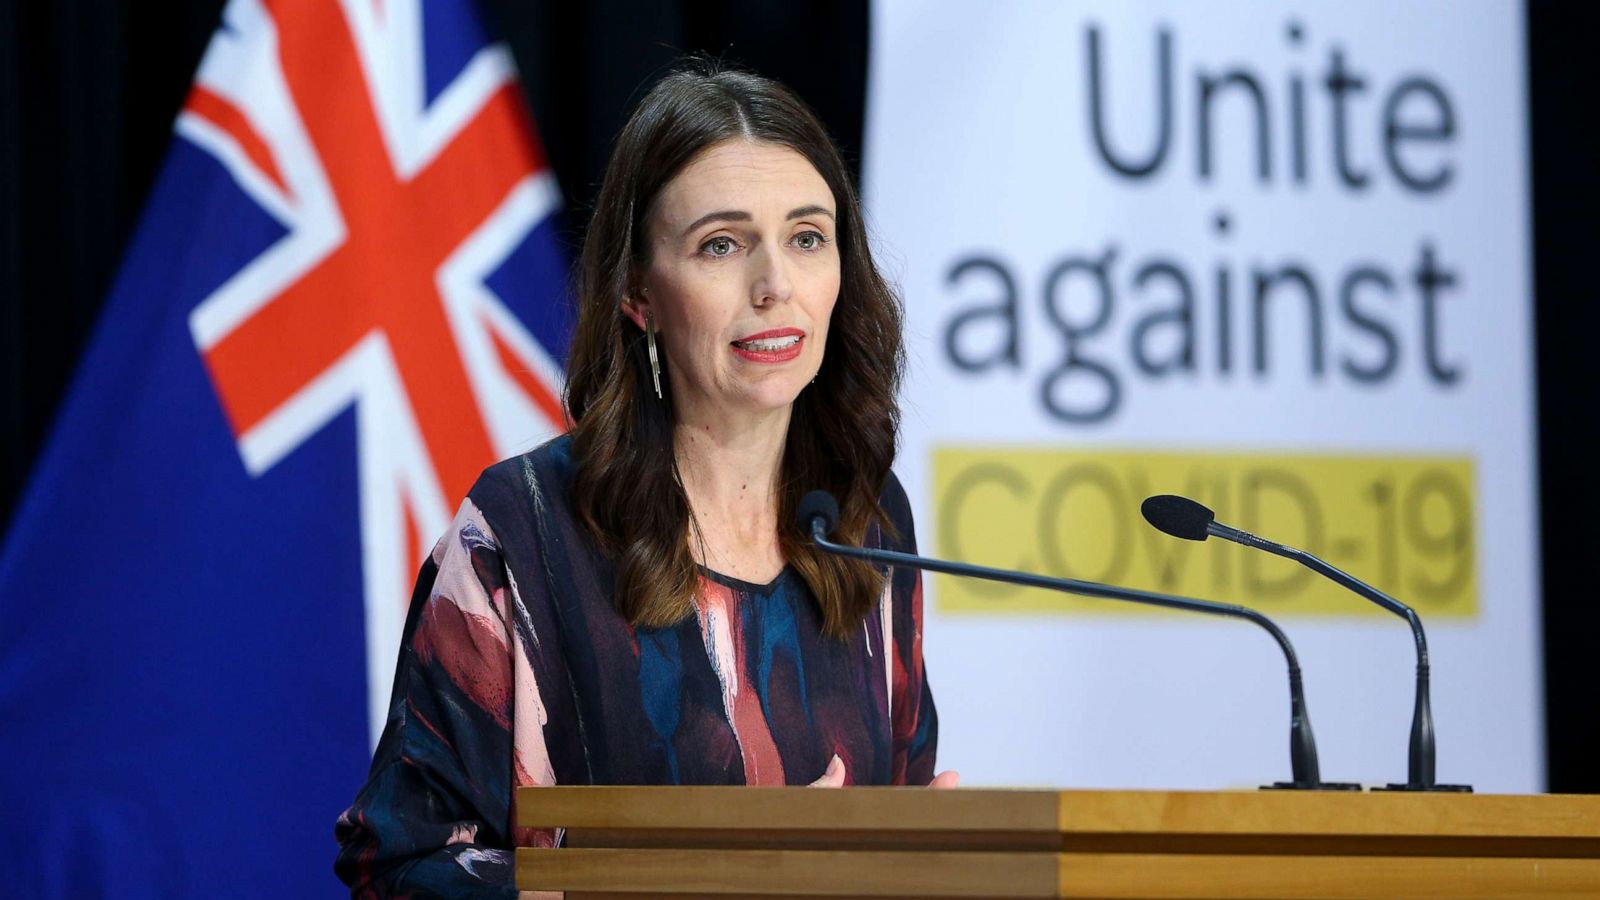 New Zealand Prime Minister Jacinda Ardern suggests 4-day workweek to recover from pandemic - ABC News